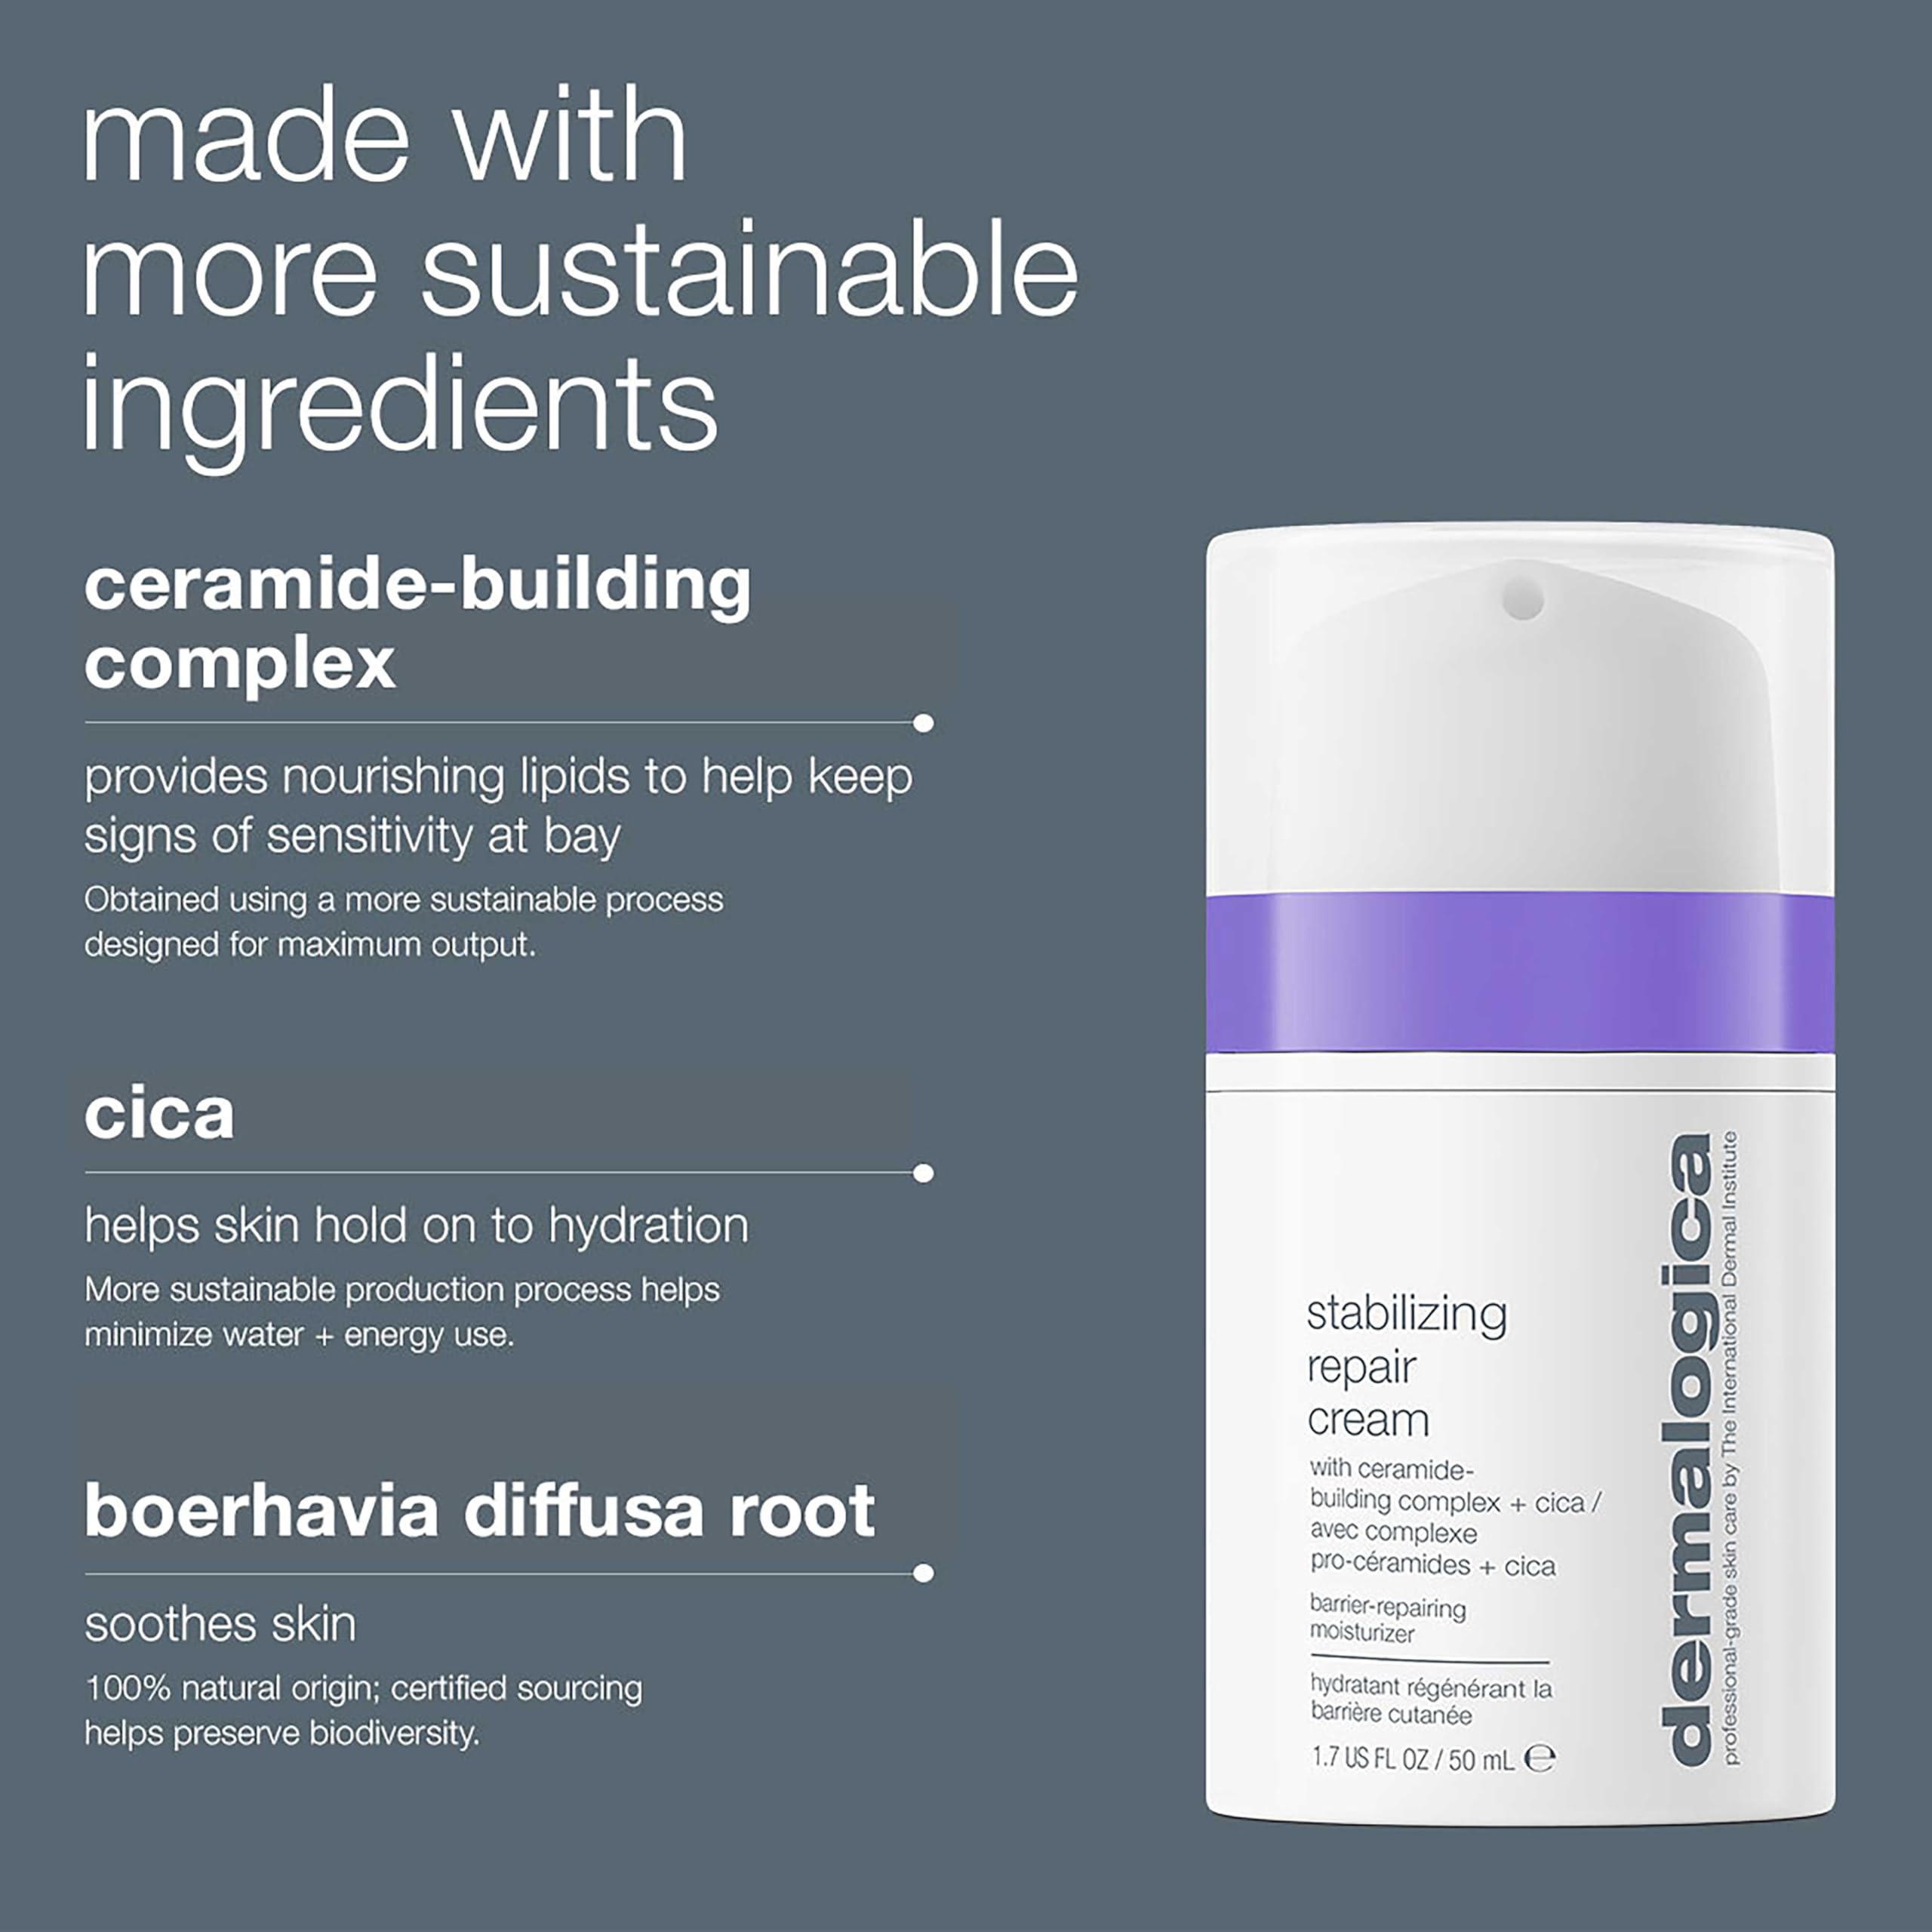 Dermalogica Stabilizing Repair Cream, Face Moisturizer for Sensitive Skin with Cica - Strengthens, Soothes, and Repairs Skin Barrier, 1.7 fl oz